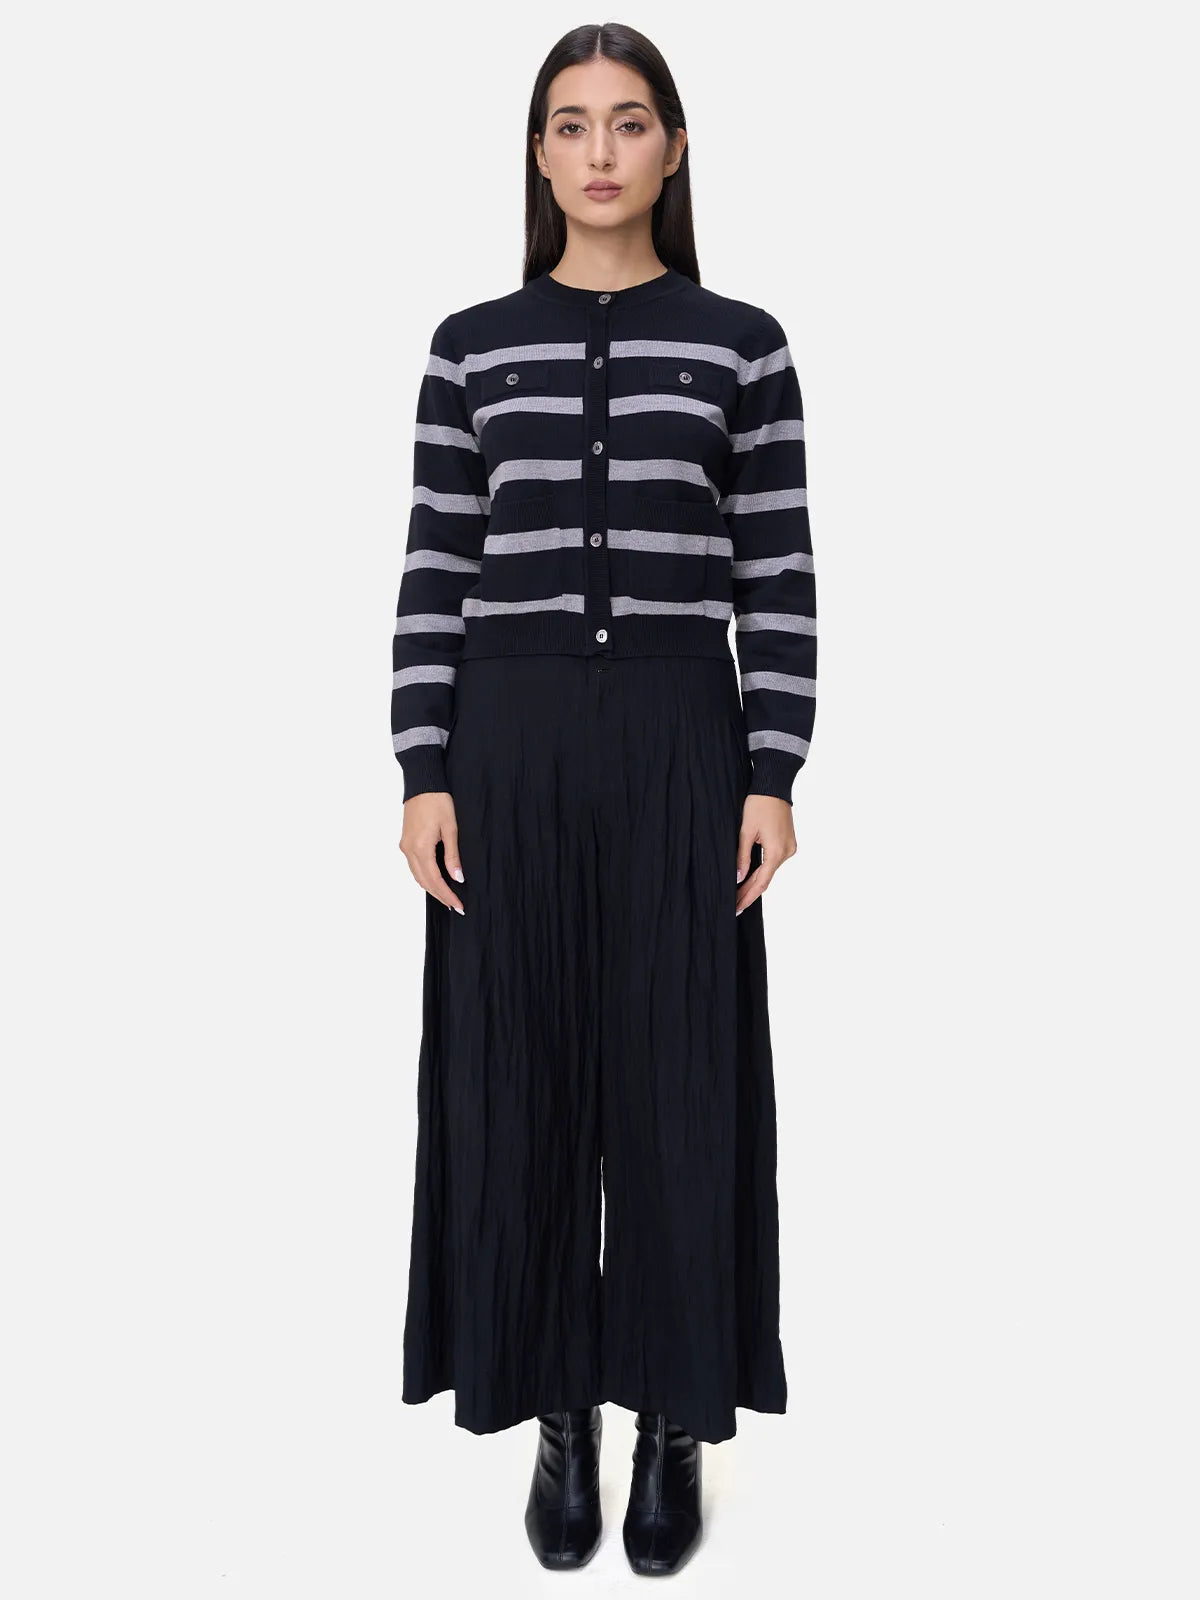 Comfortable fit and confident style in the striped cardigan with a round neckline